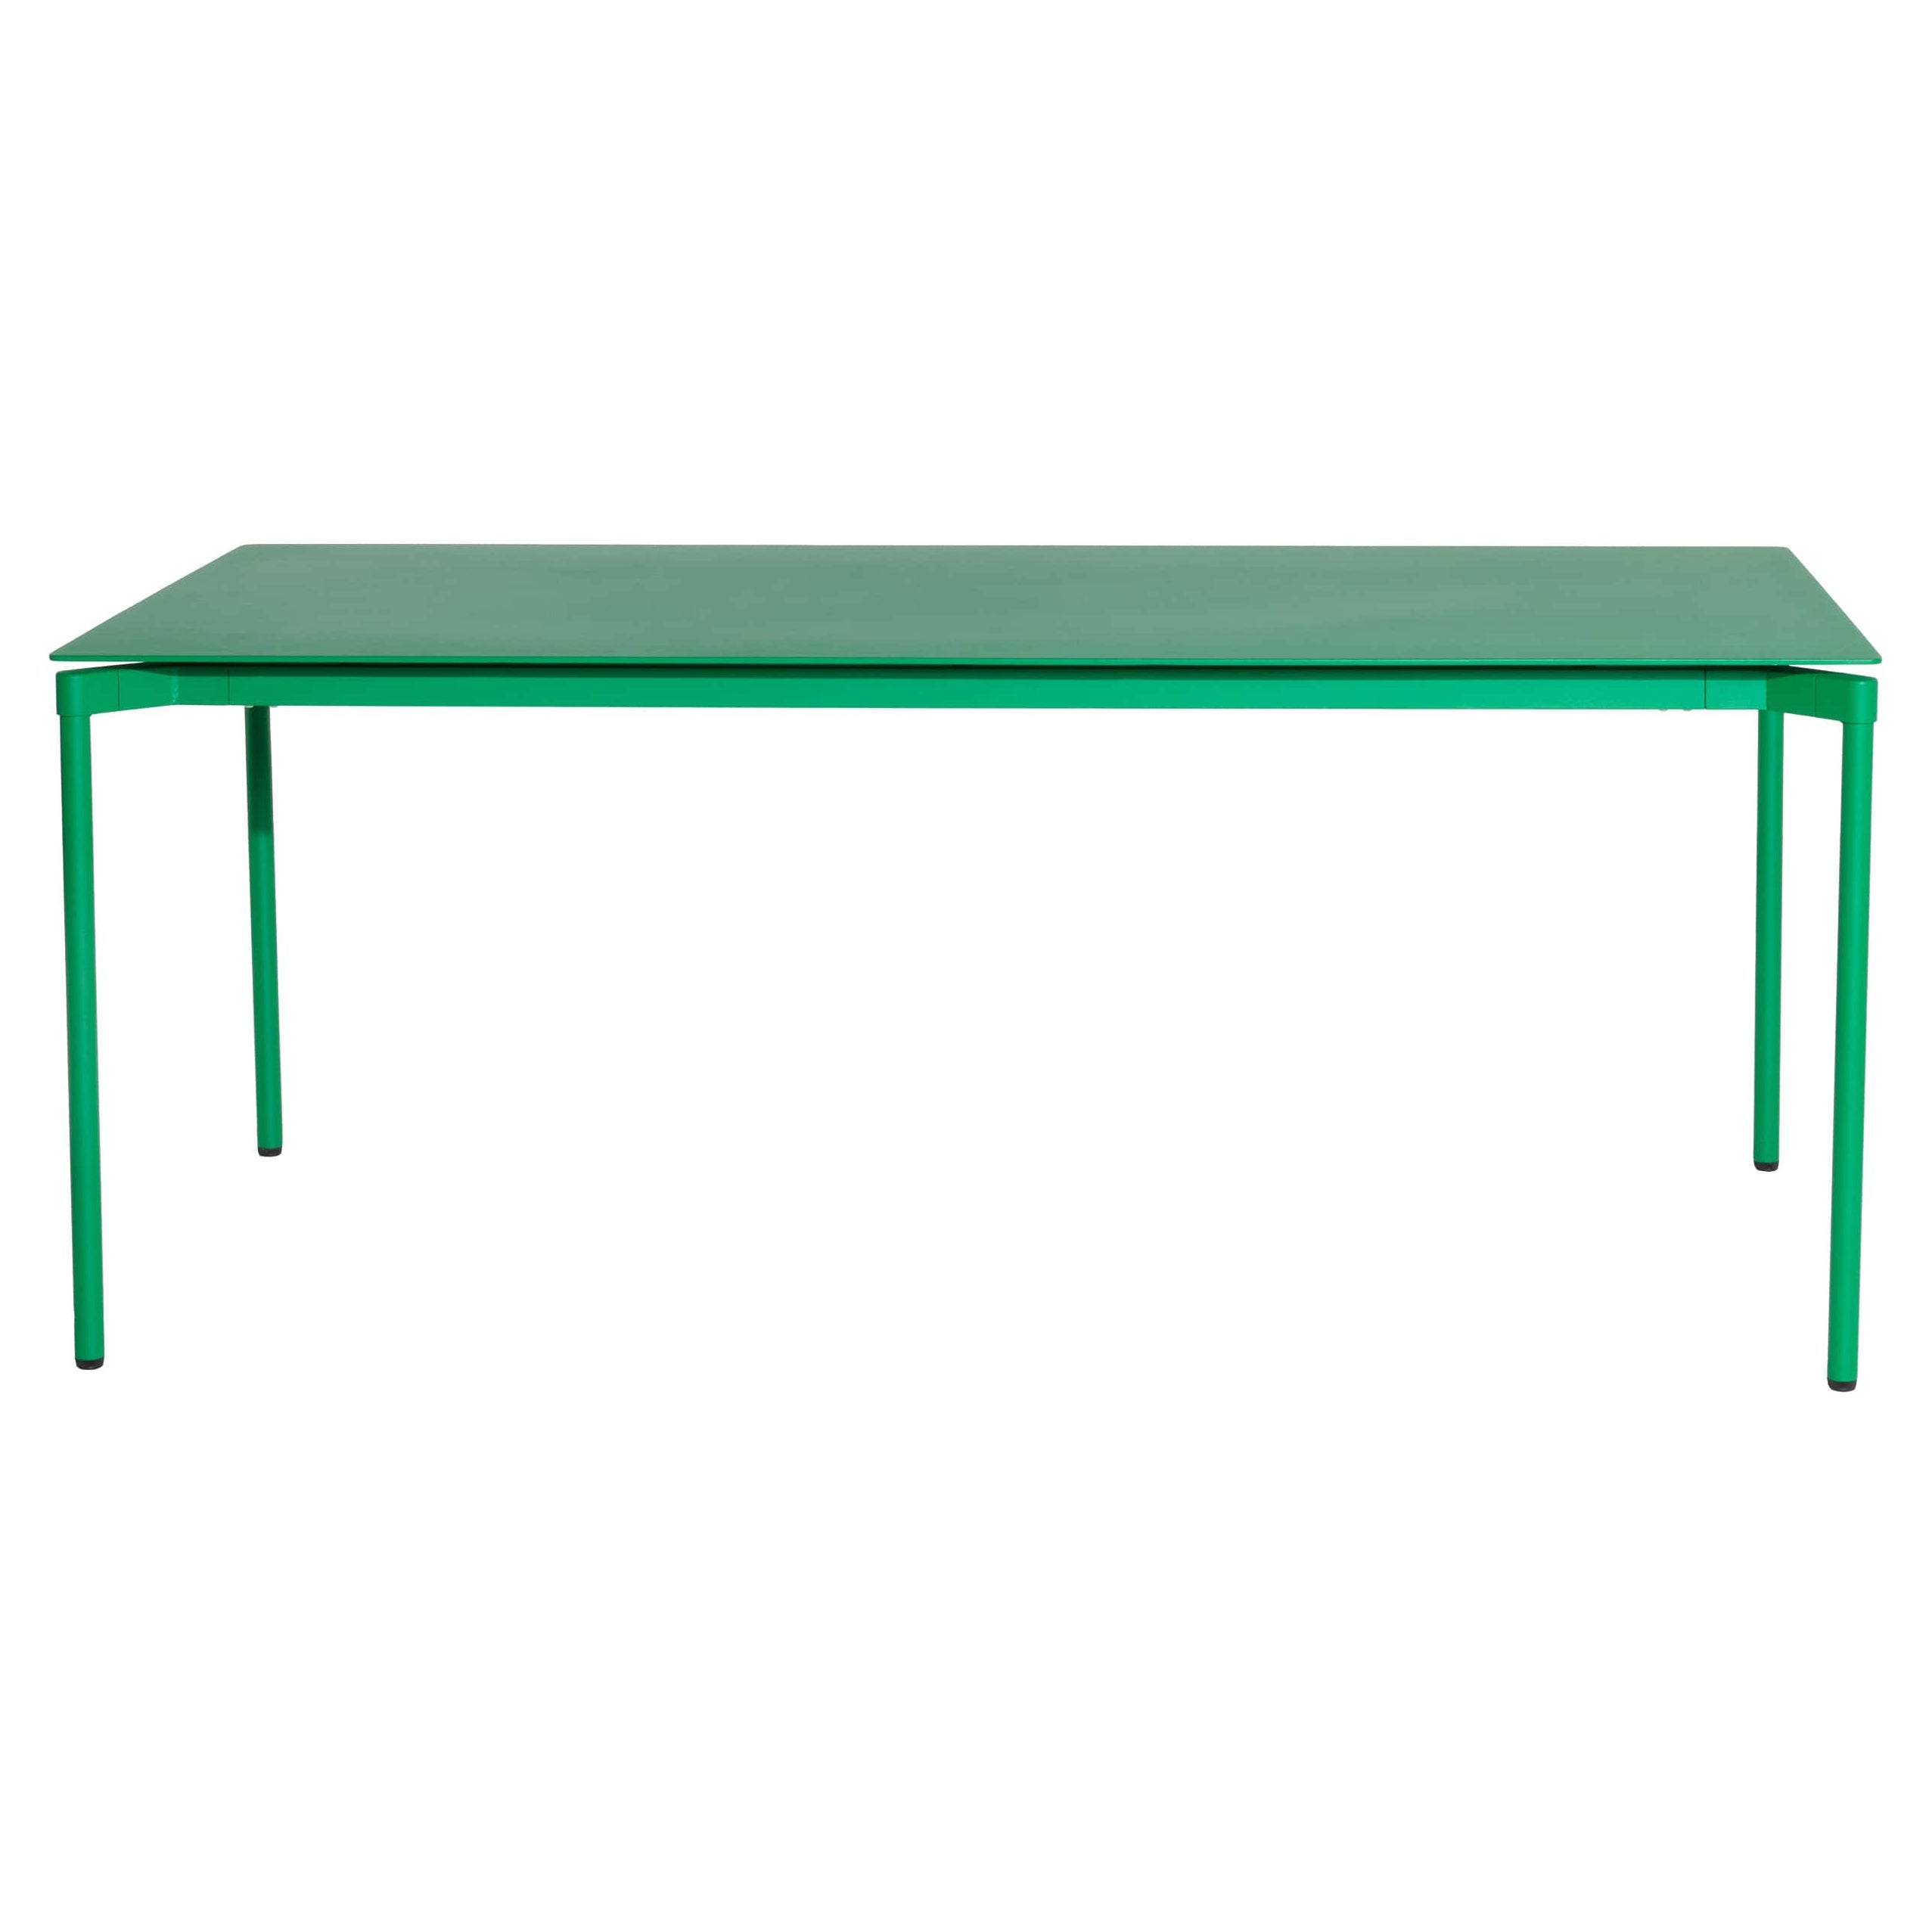 Petite Friture Fromme Rectangular Table in Mint-Green Aluminium by Tom Chung For Sale